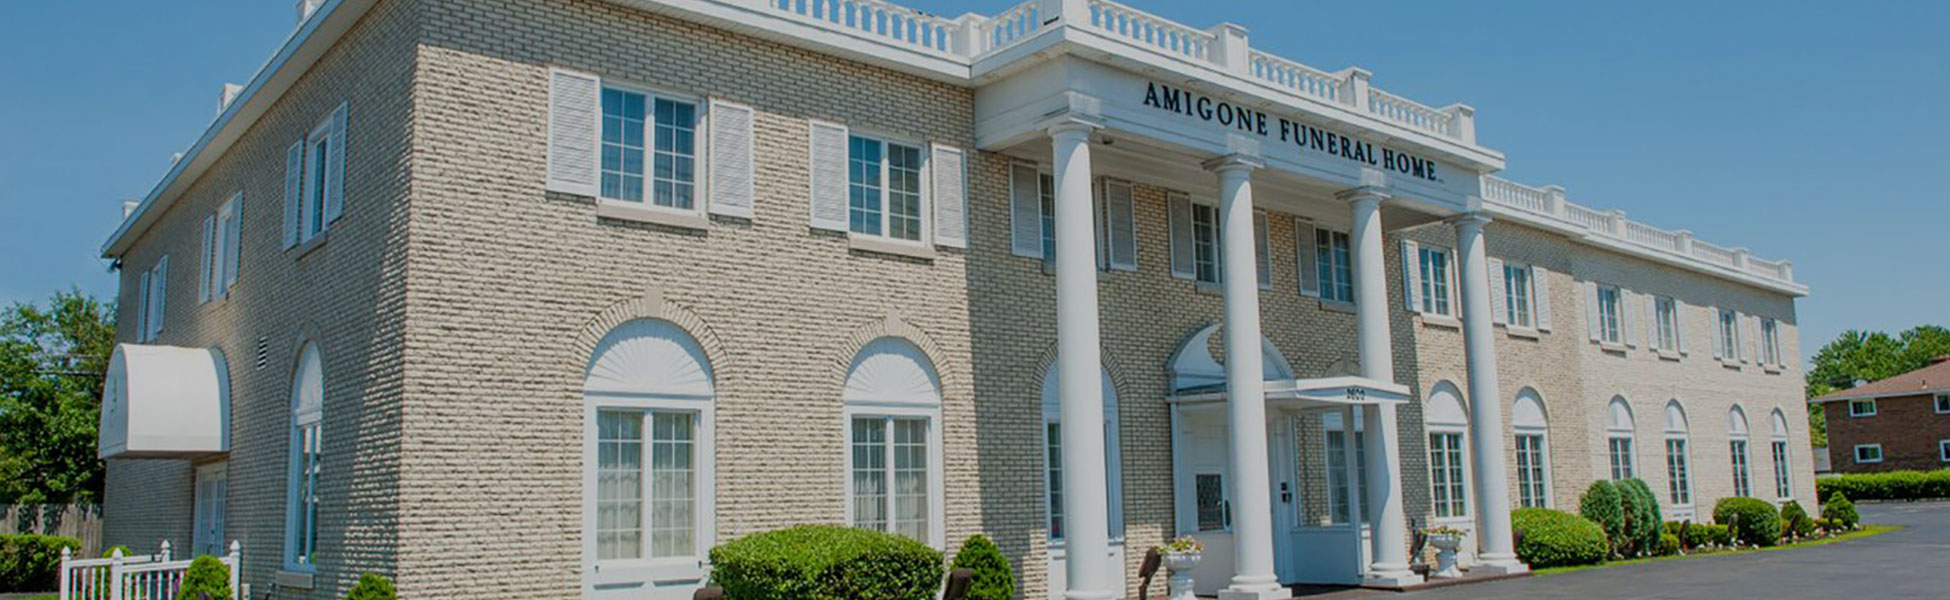 amigone funeral home cleveland drive hd porn pic